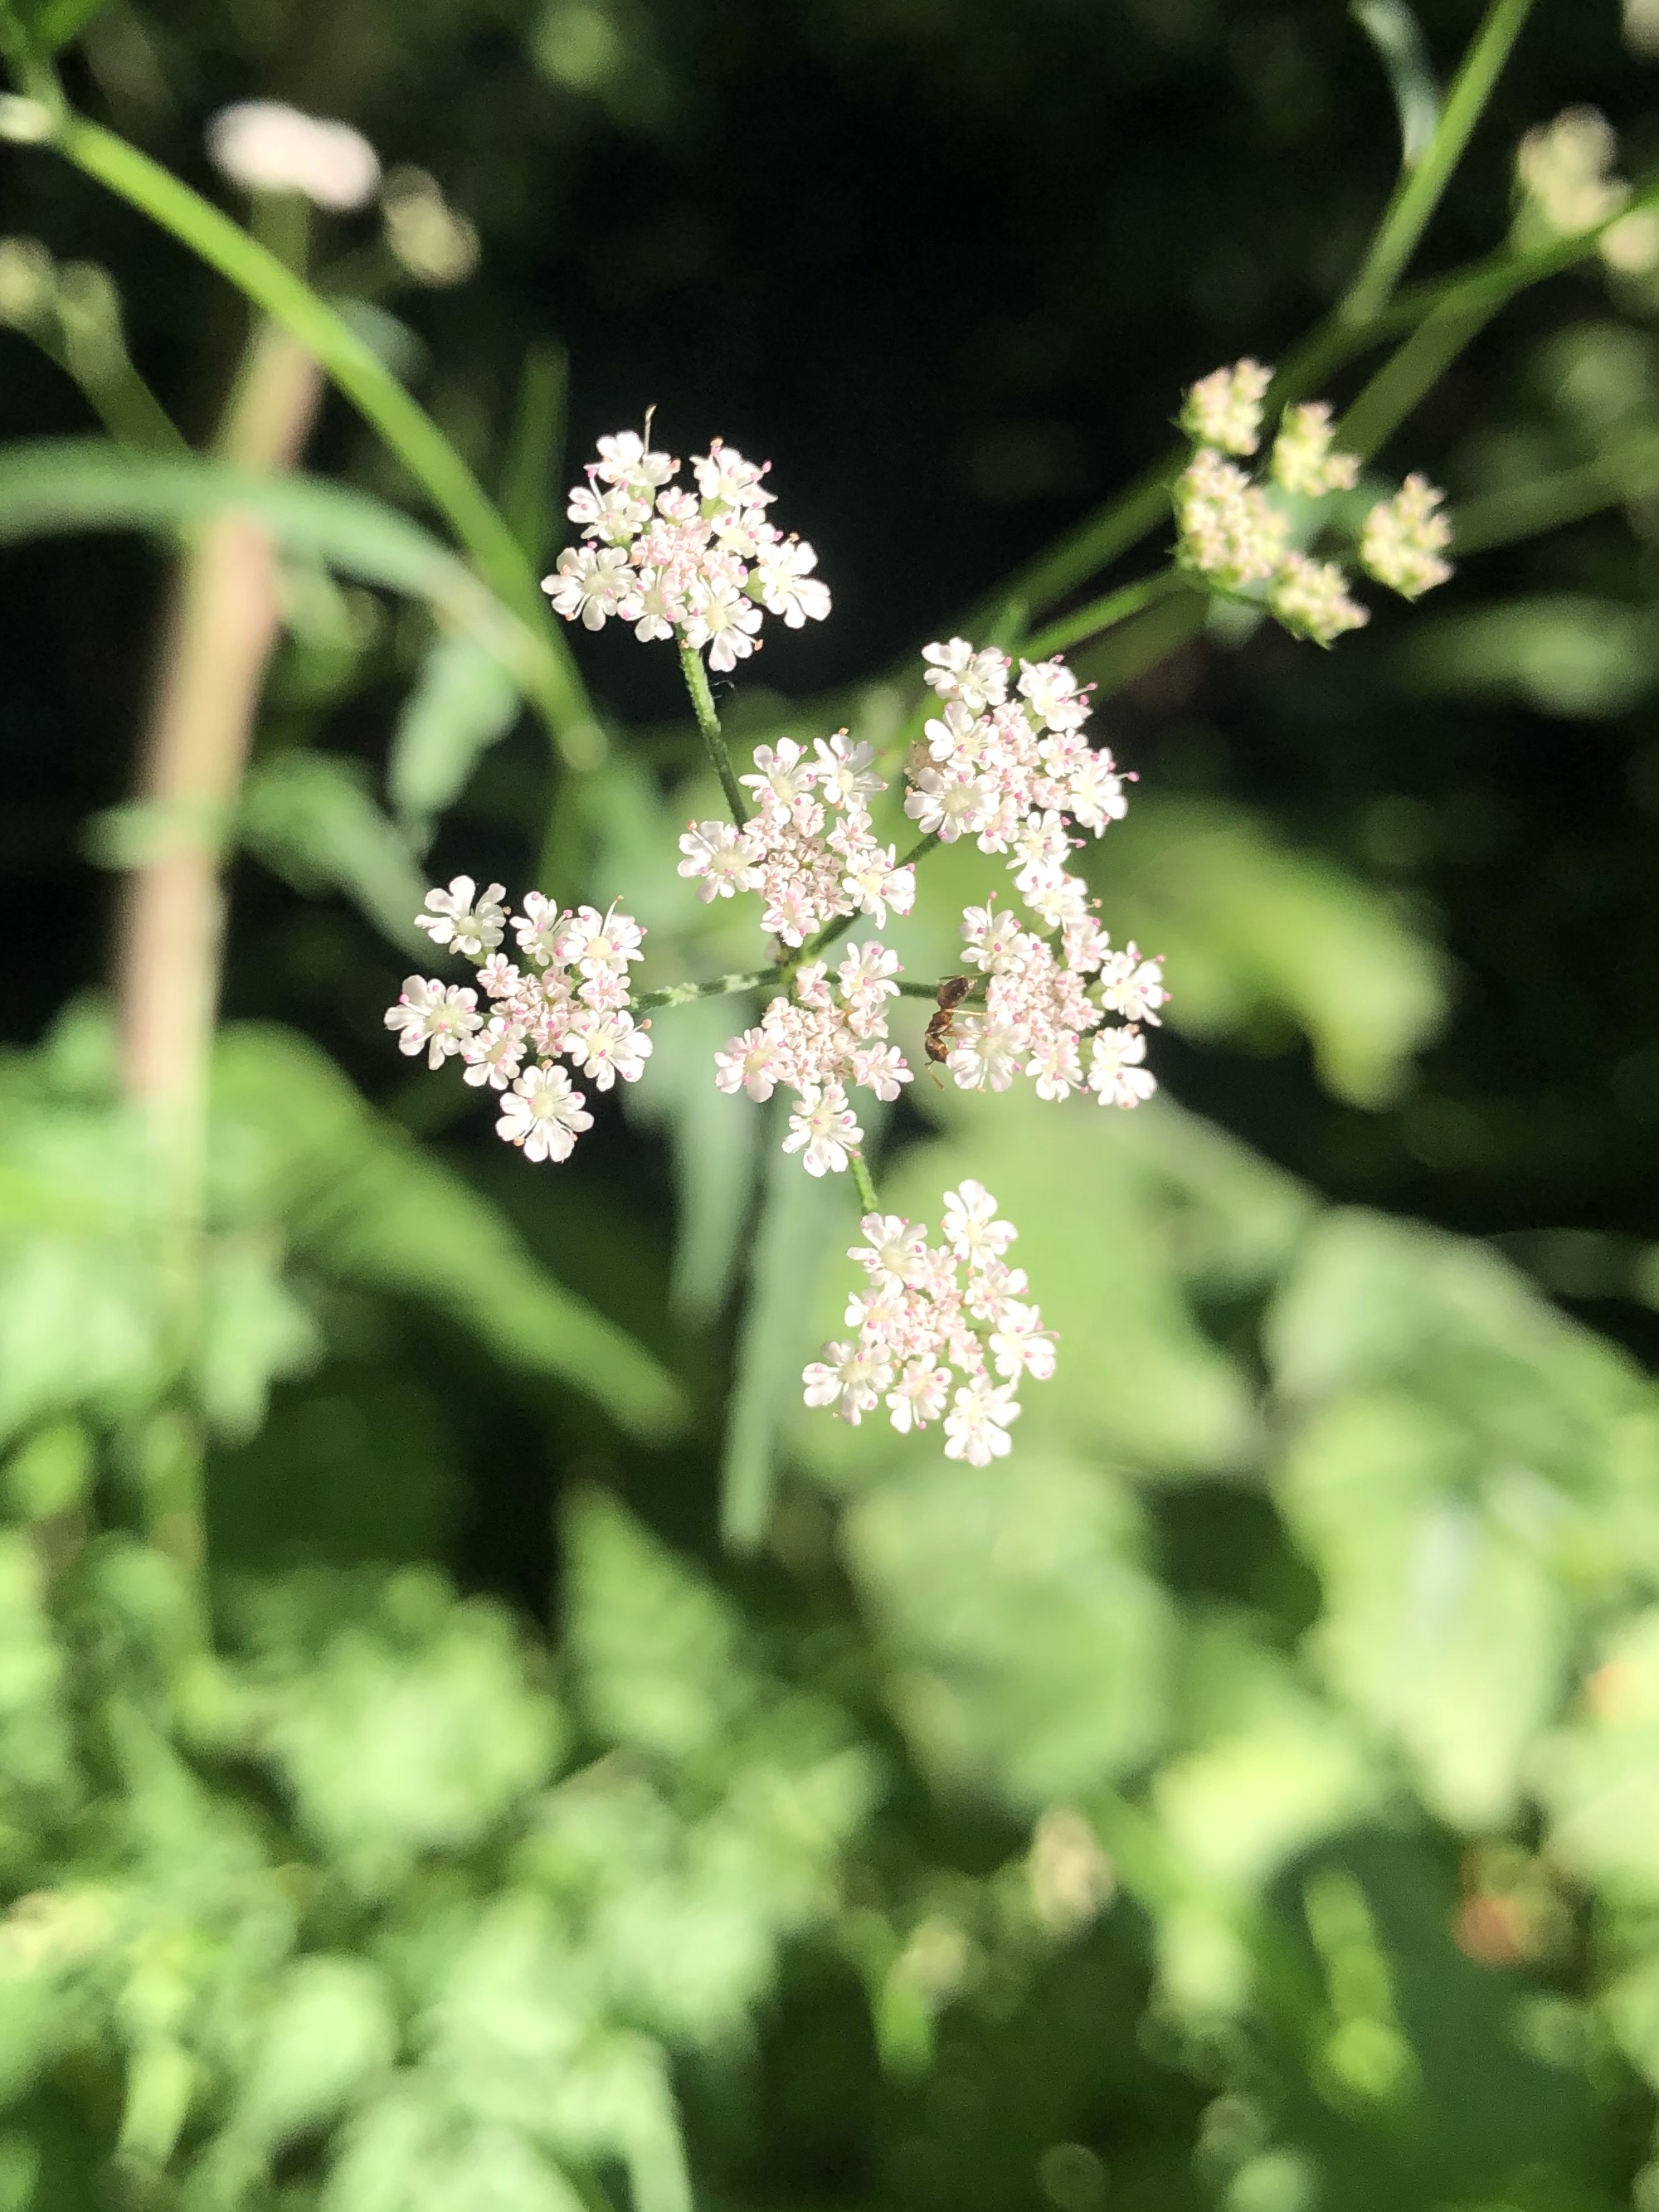 Hedge Parsley in Madison, Wisconsin on July 18, 2022.